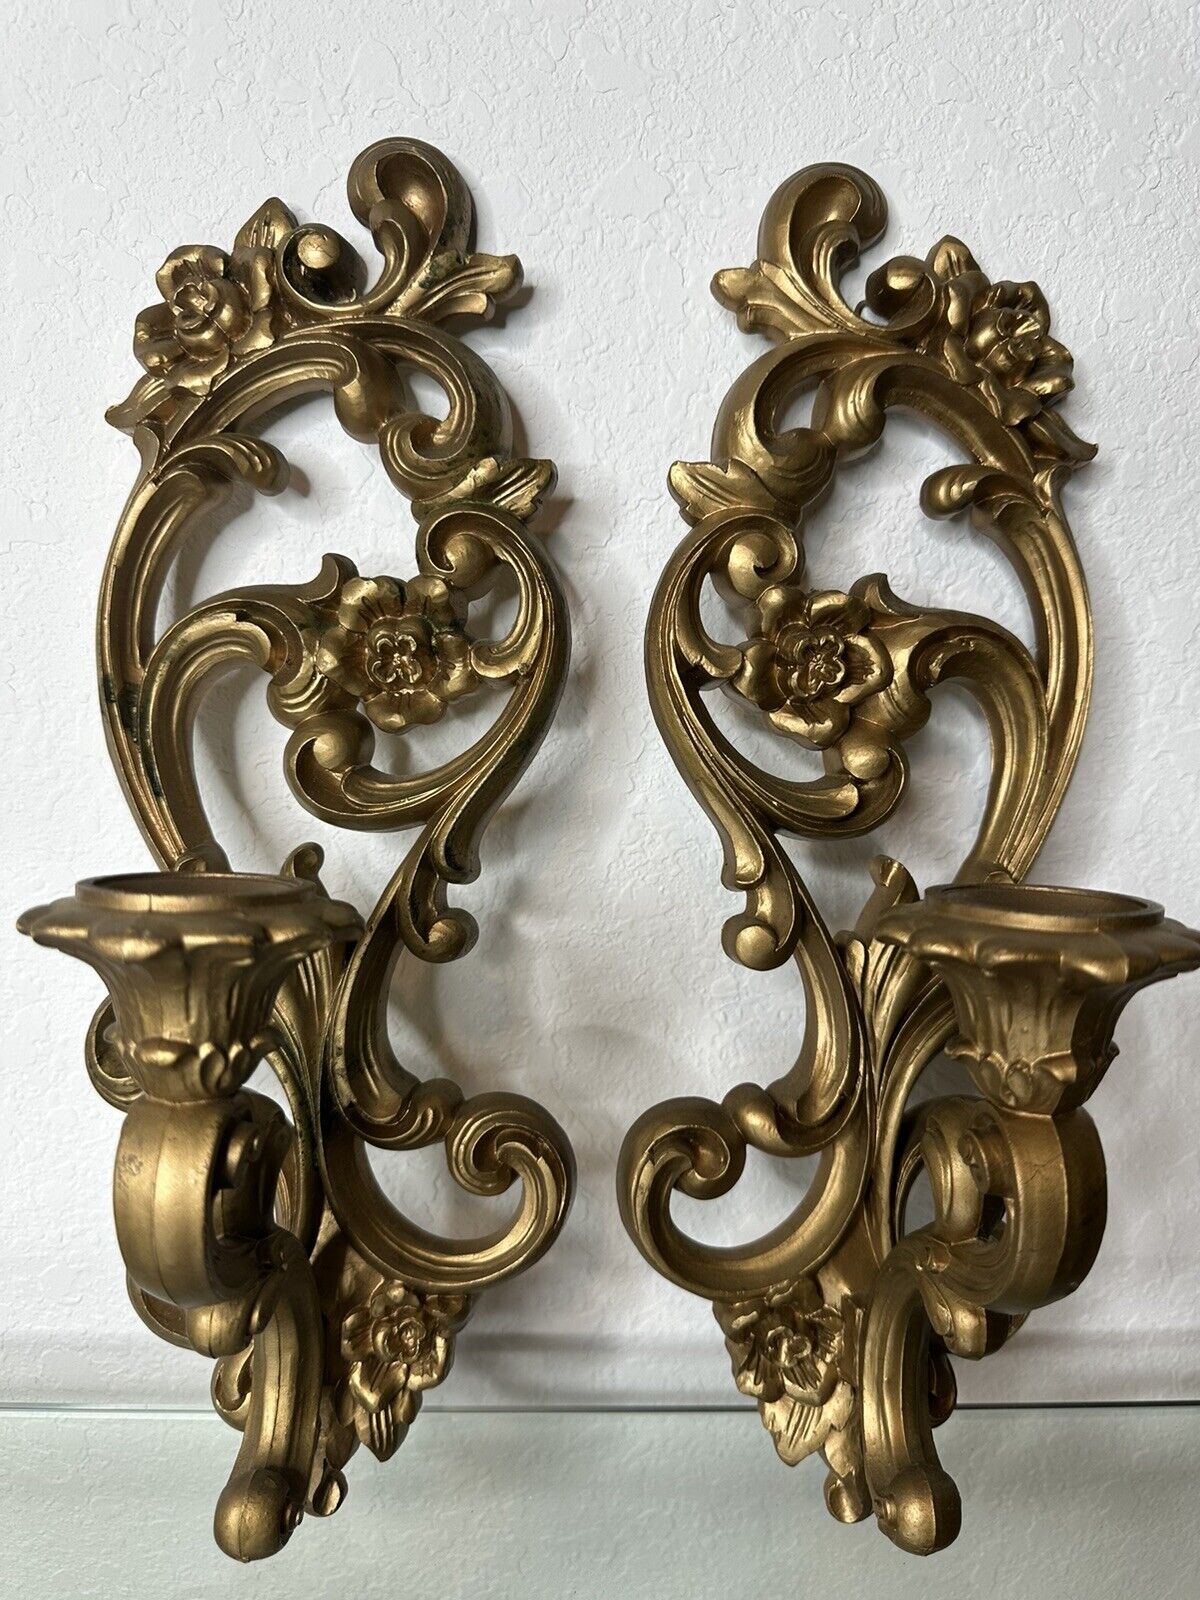 Pair of Vintage 1971 HOMCO Ornate Gold Floral Scroll Wall Sconces Candle Holders